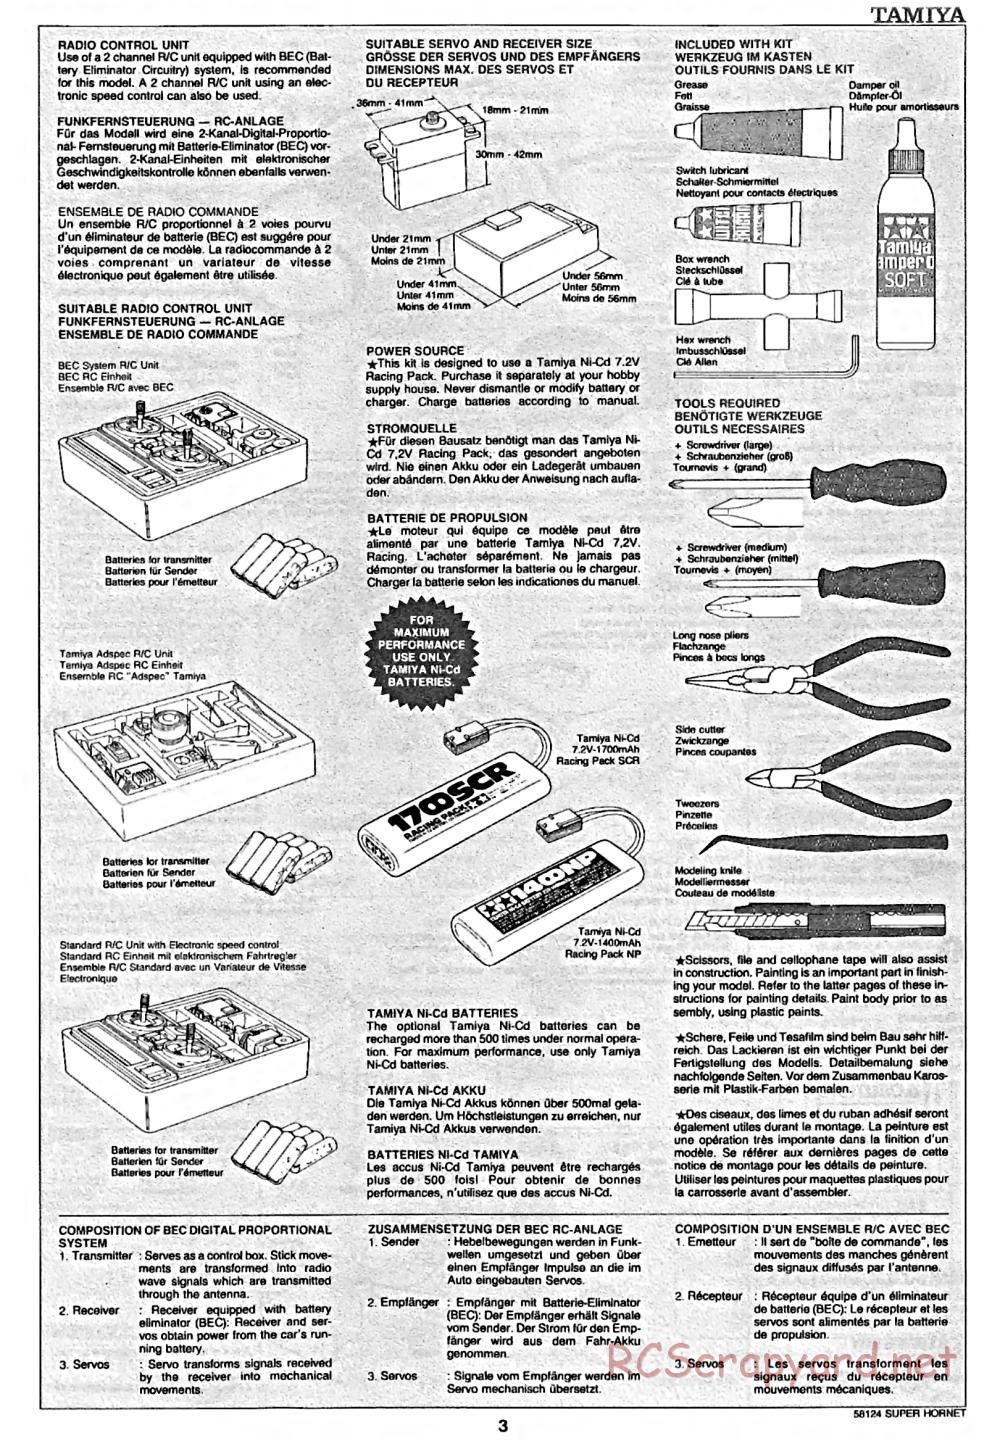 Tamiya - Super Hornet Chassis - Manual - Page 3